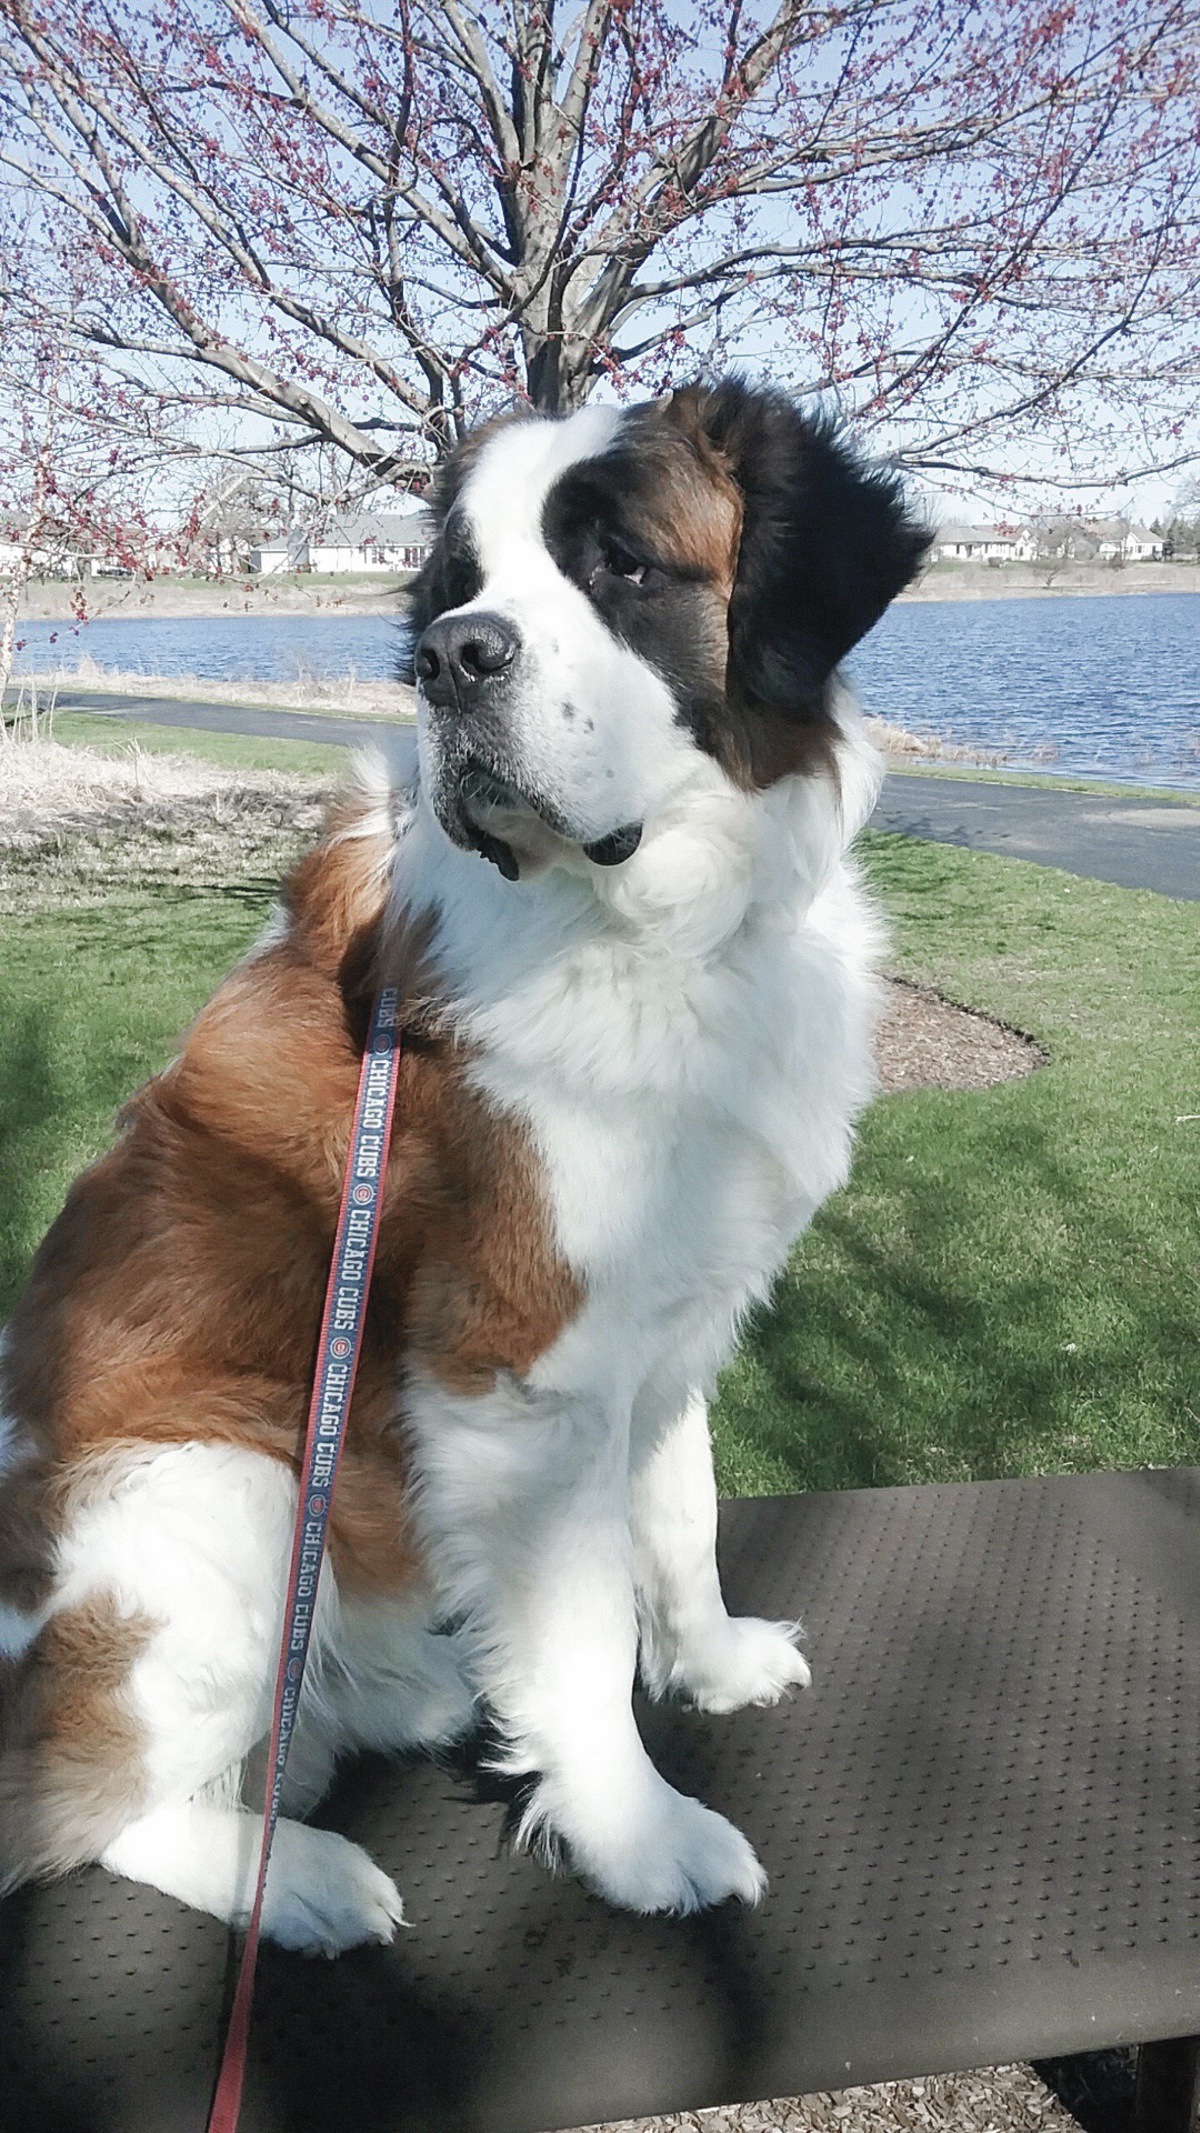 Wrigley the St. Bernard was a popular furry face around Sun City. Considered by many SC’s mascot, he was often referred to as “Mayor.” Sadly, the Kay family said goodbye to Wrigely on March 29. (Photo provided)